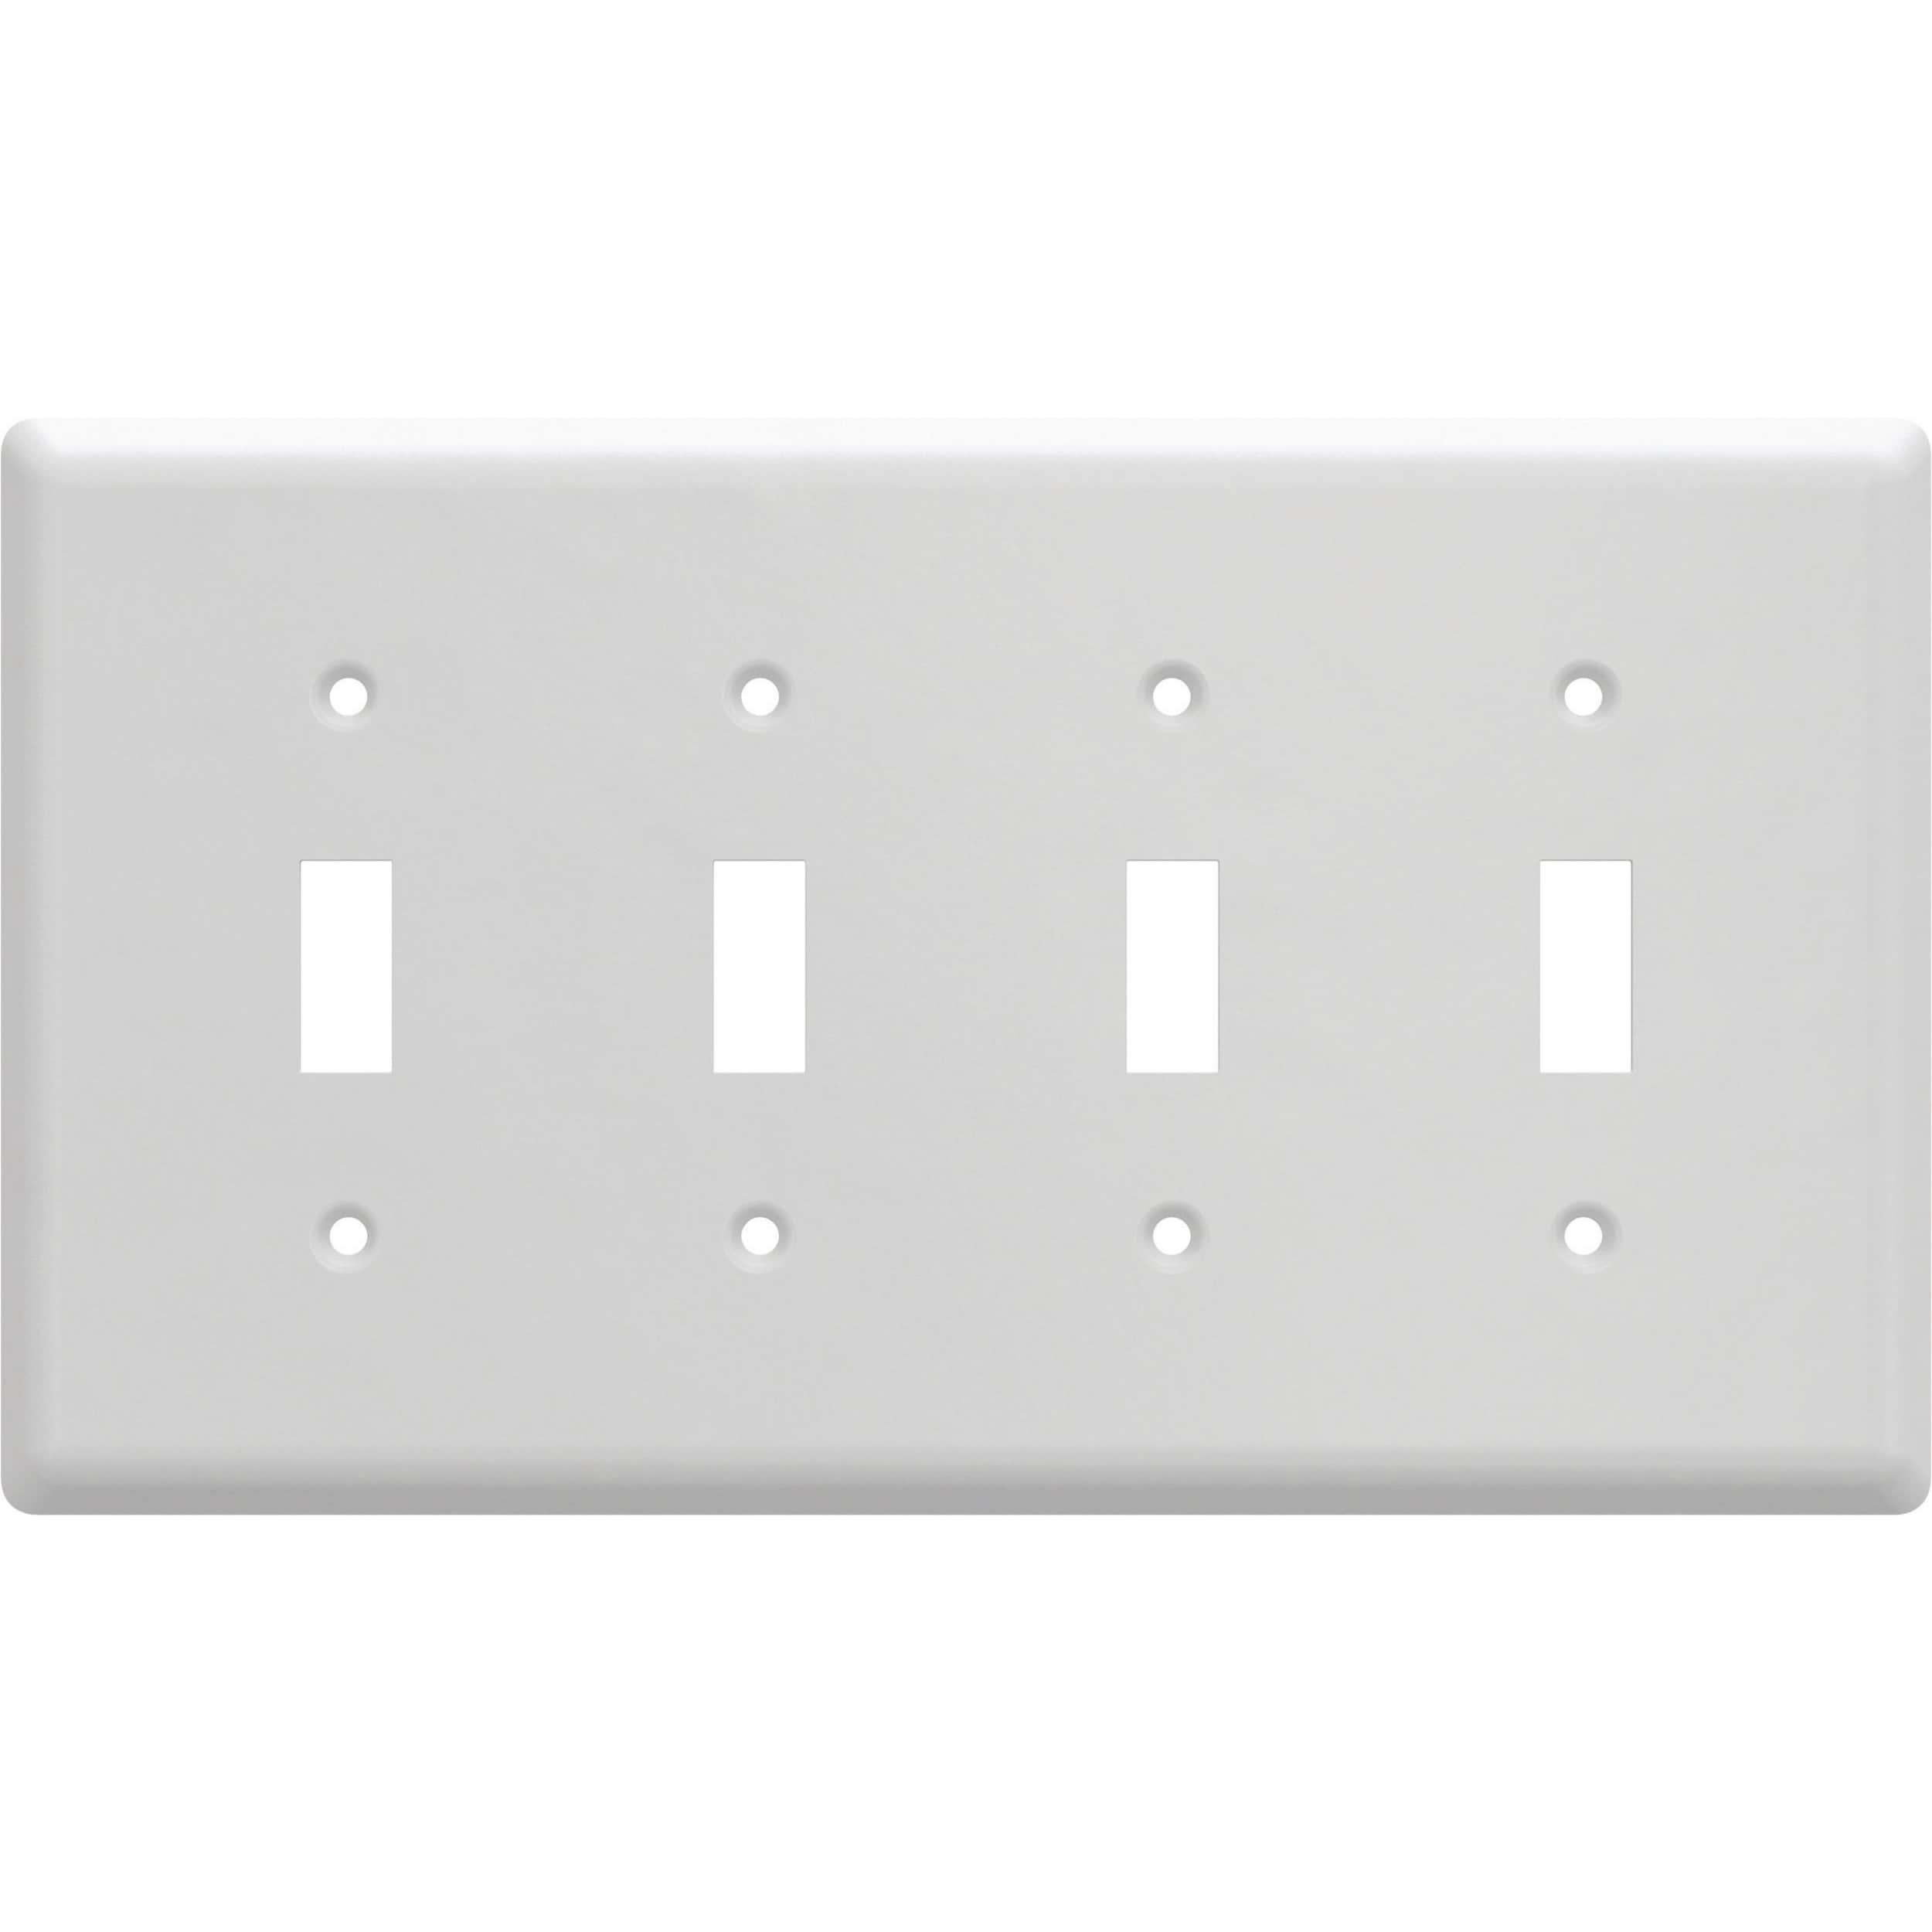 Simple Square 4-Gang Standard Size Pure White Steel Indoor Toggle Wall Plate | - allen + roth W45074-PW-CP